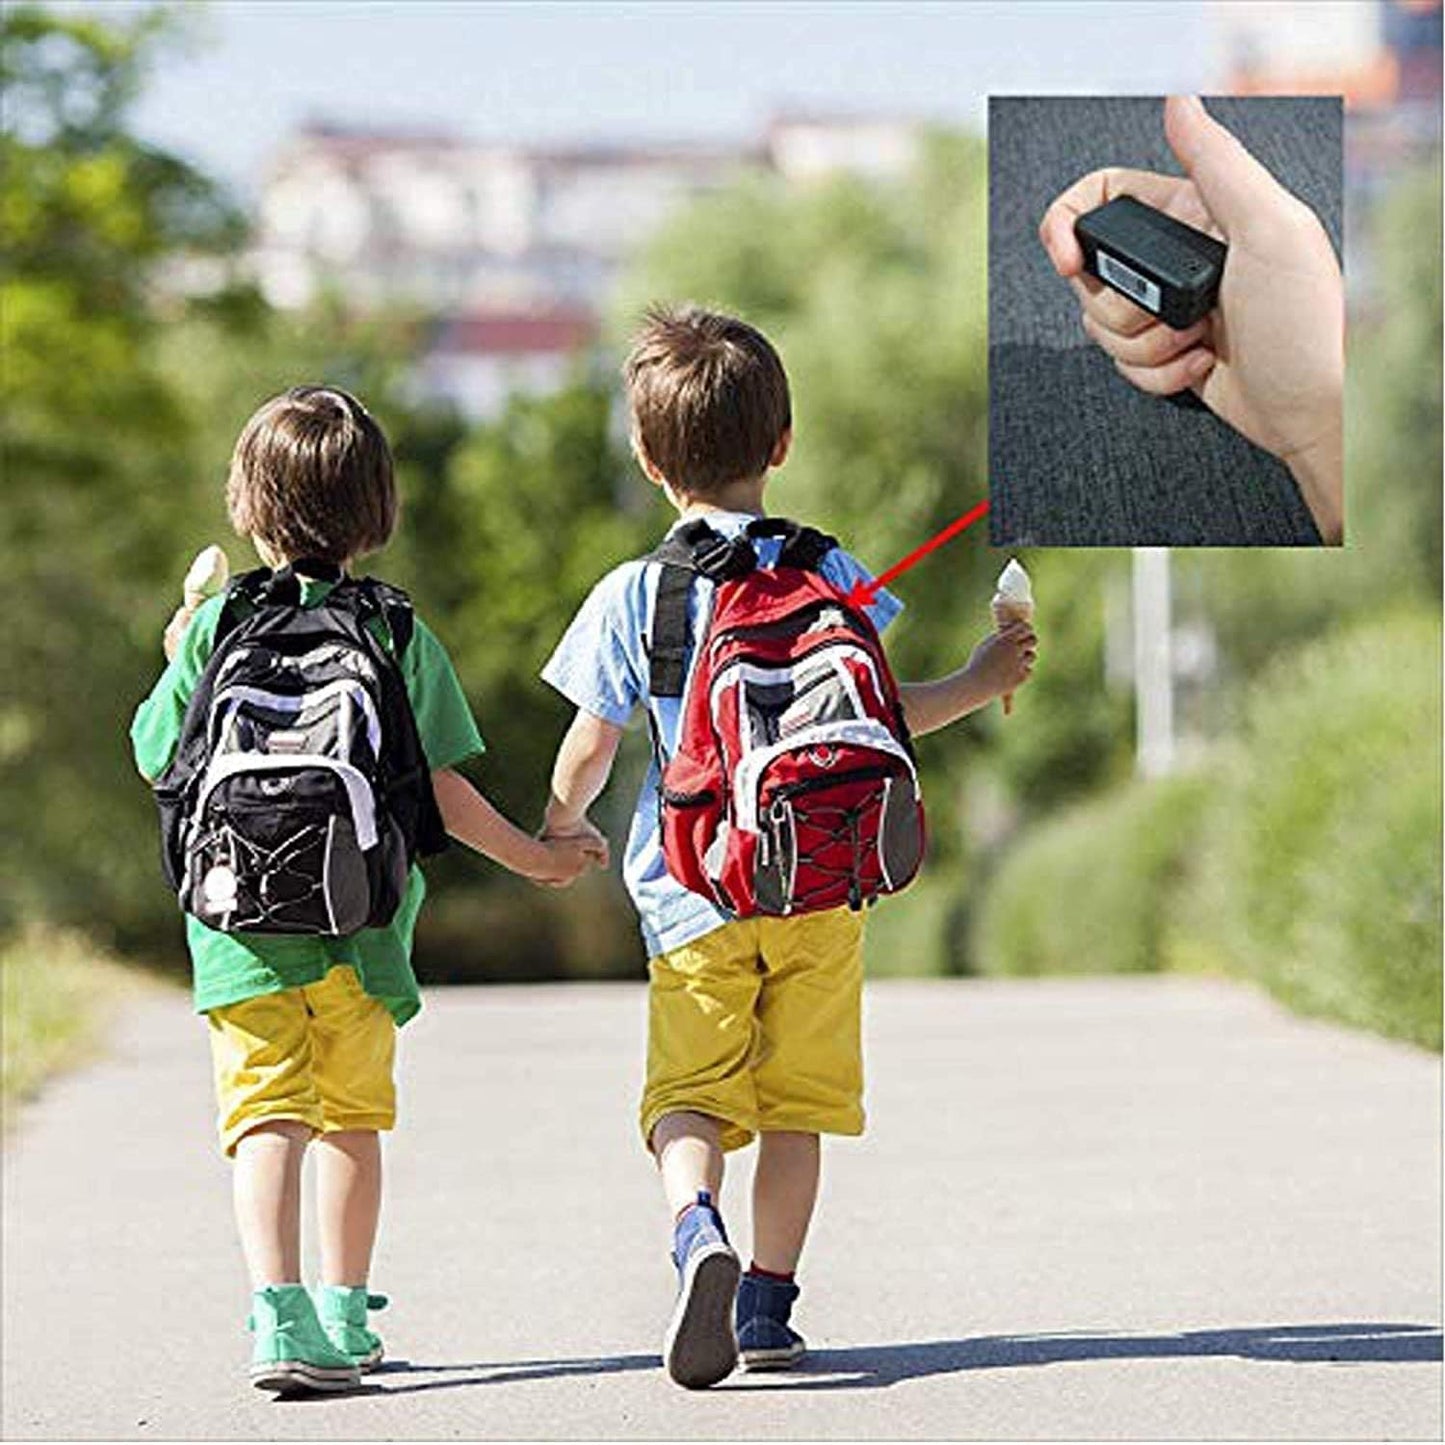 WINNES 4G TK901 Mini GPS Tracker，Rechargeable Magnetic Real Time Tracking GPS Tracker for Vehicle/Kids/Luggage/Wallet/Pets with Geofence Anti-Lost Tracker Devices Available Worldwide